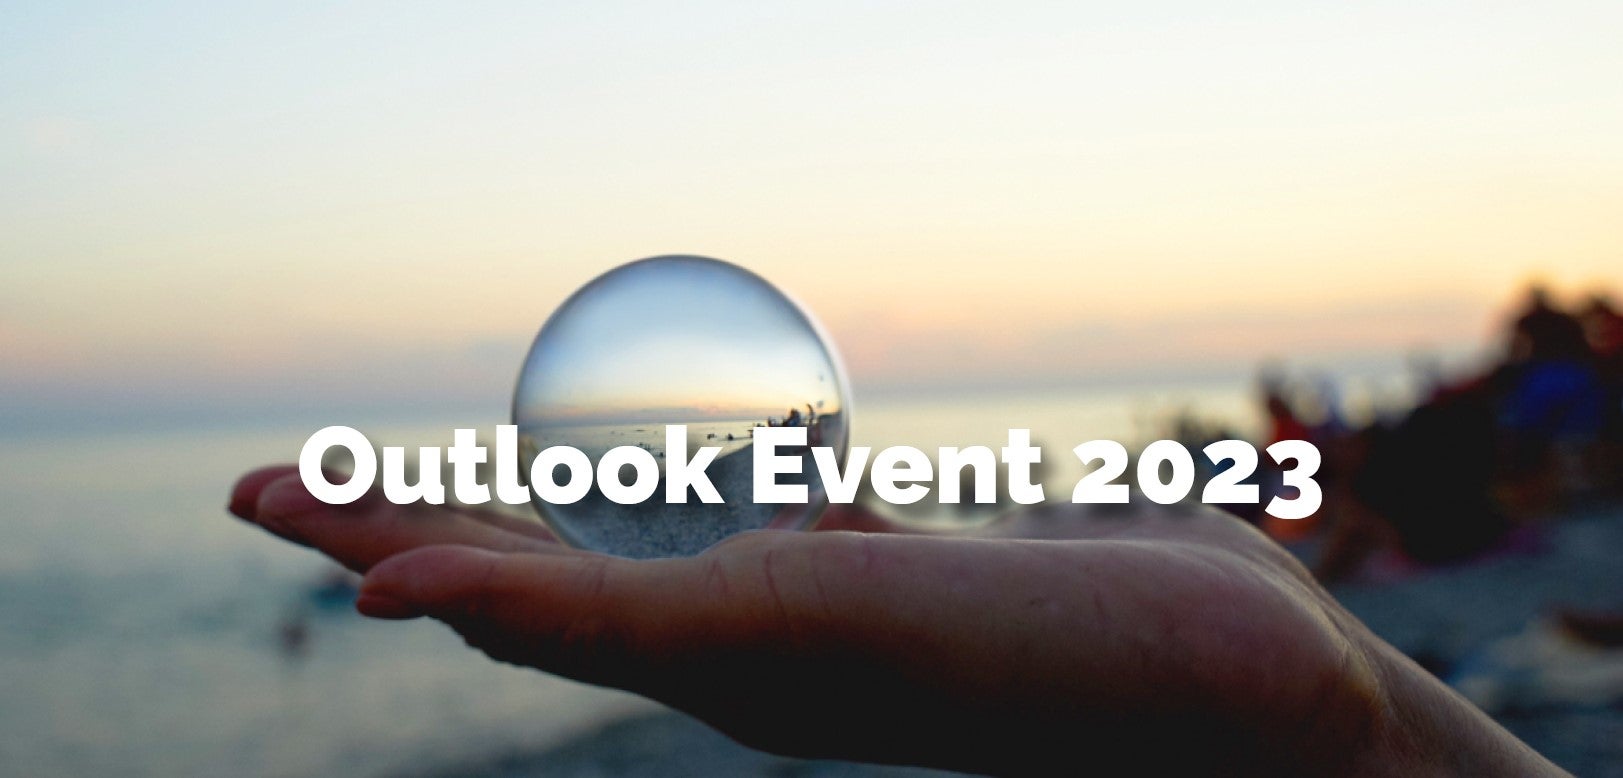 Outlook event 2023